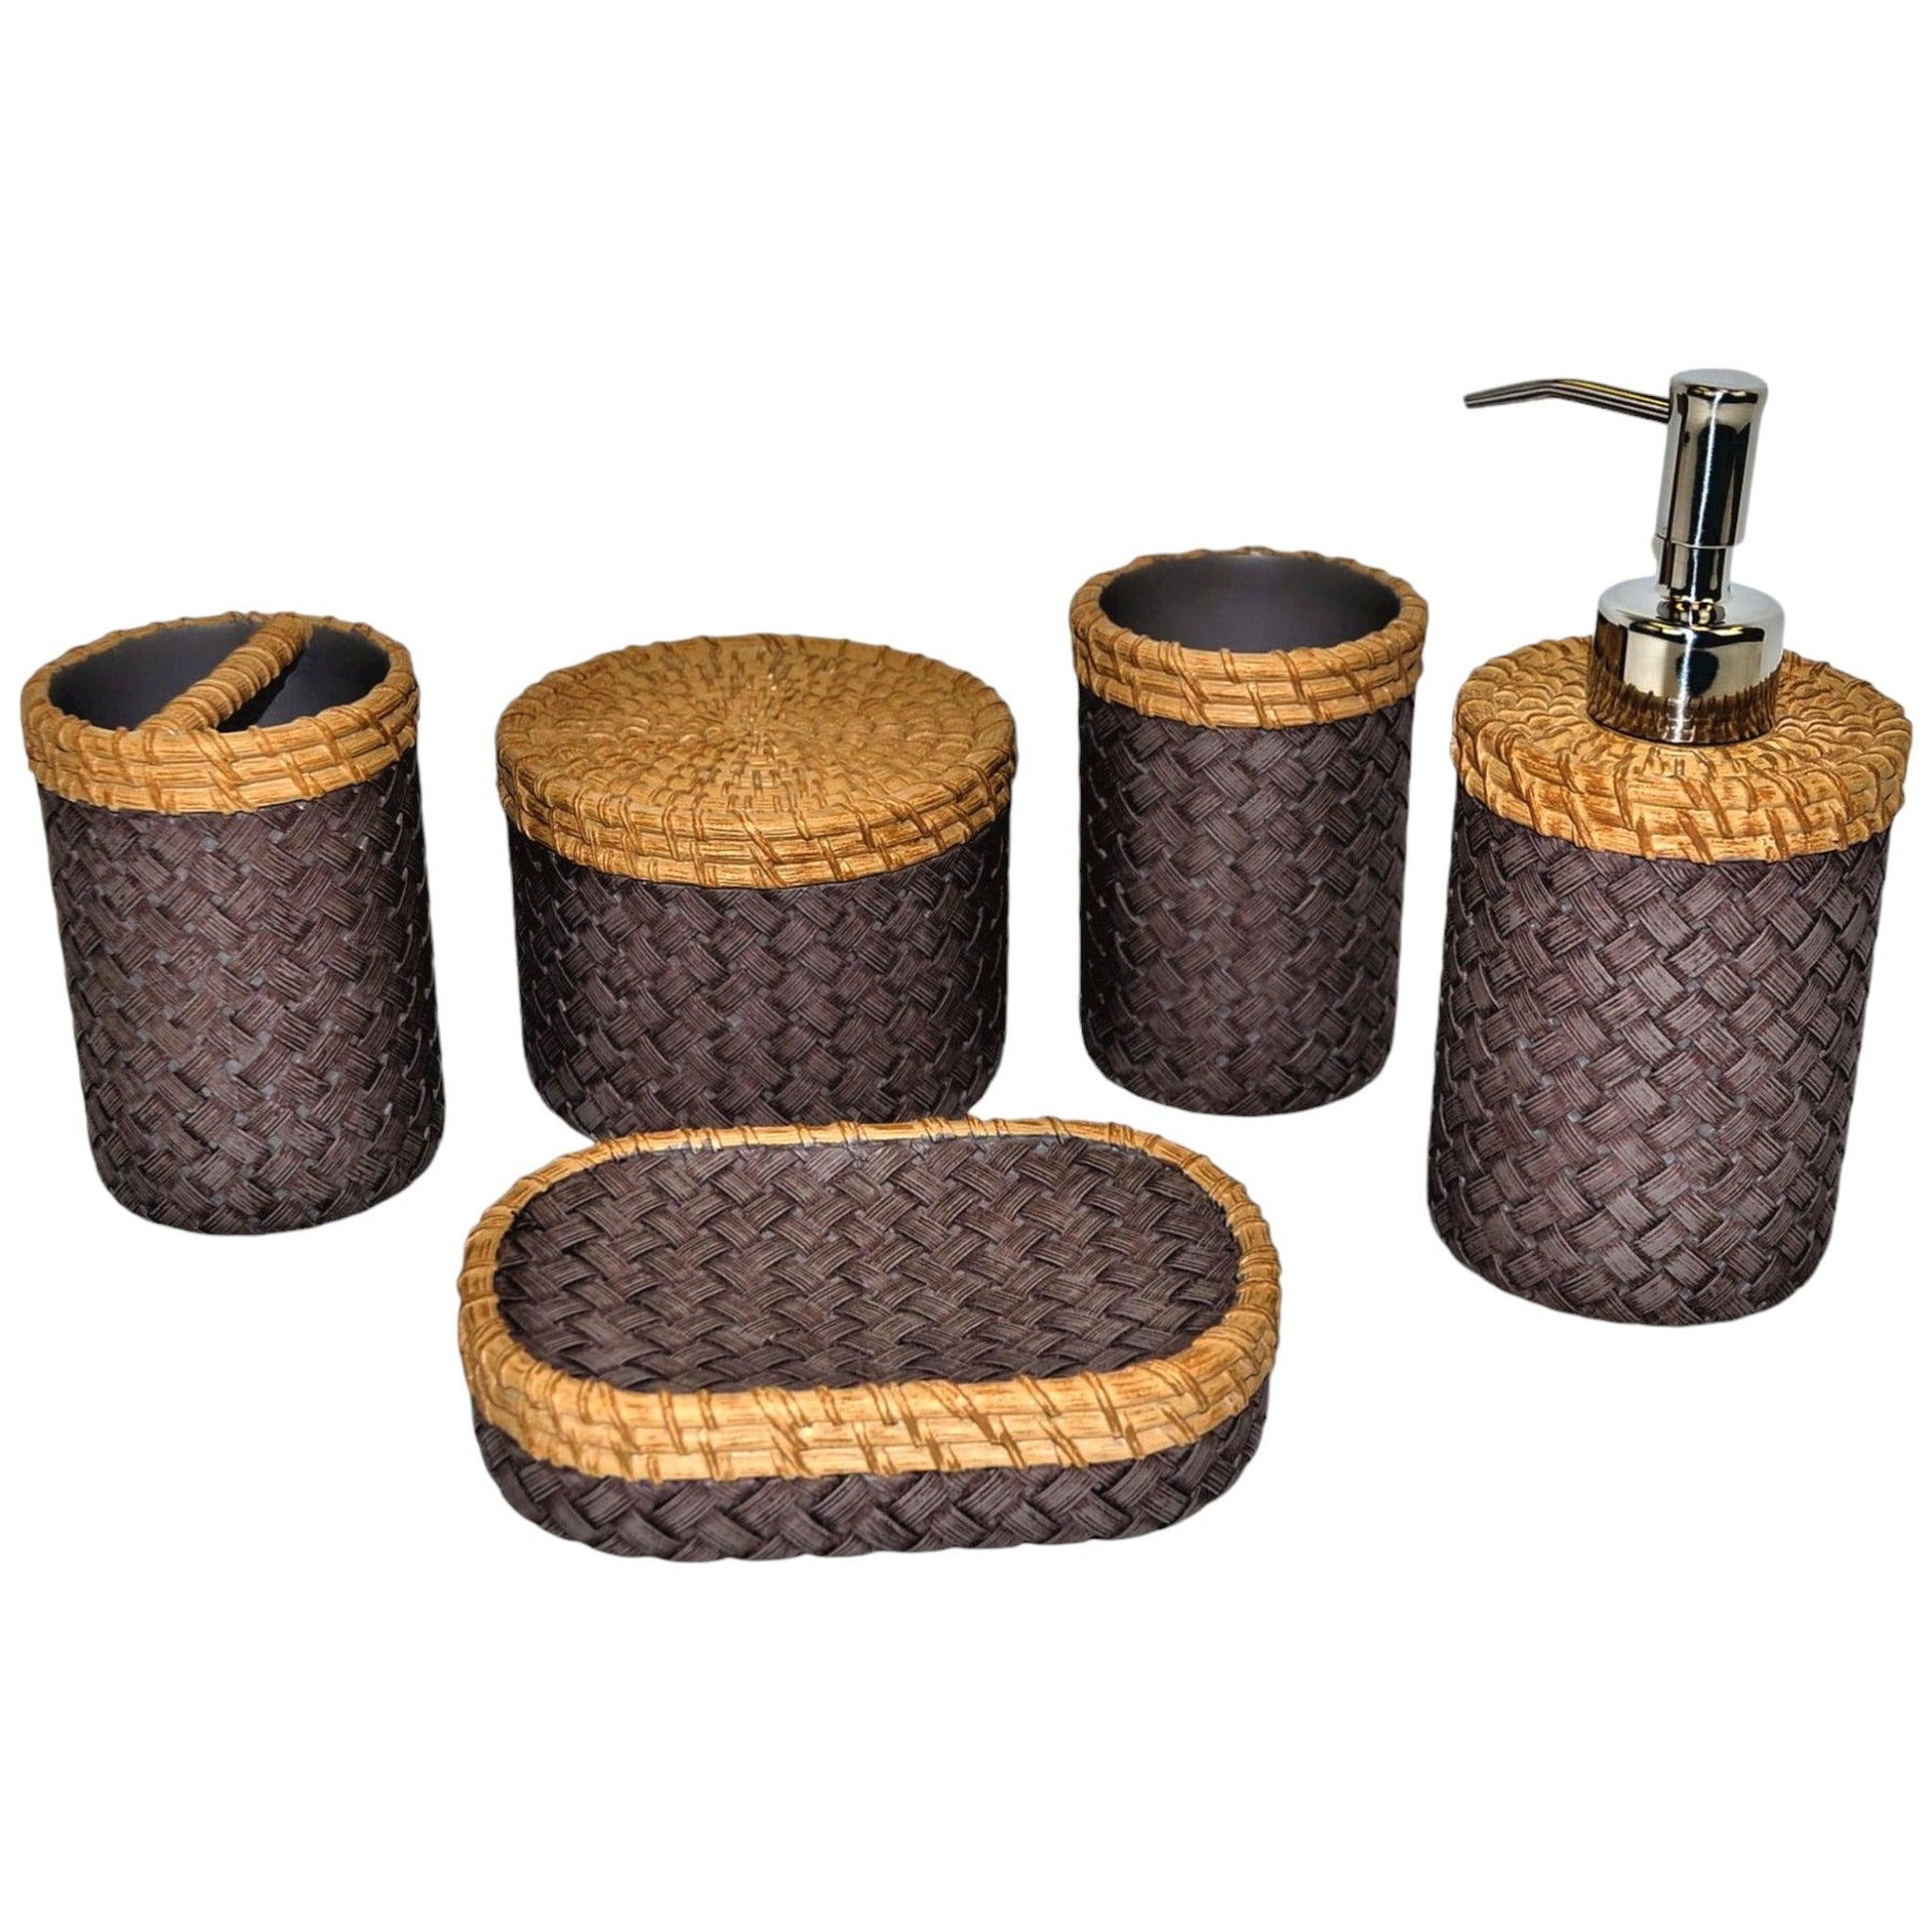 Bathroom Accessories Set of Brown and Purple Weave Design - Nature Home Decor